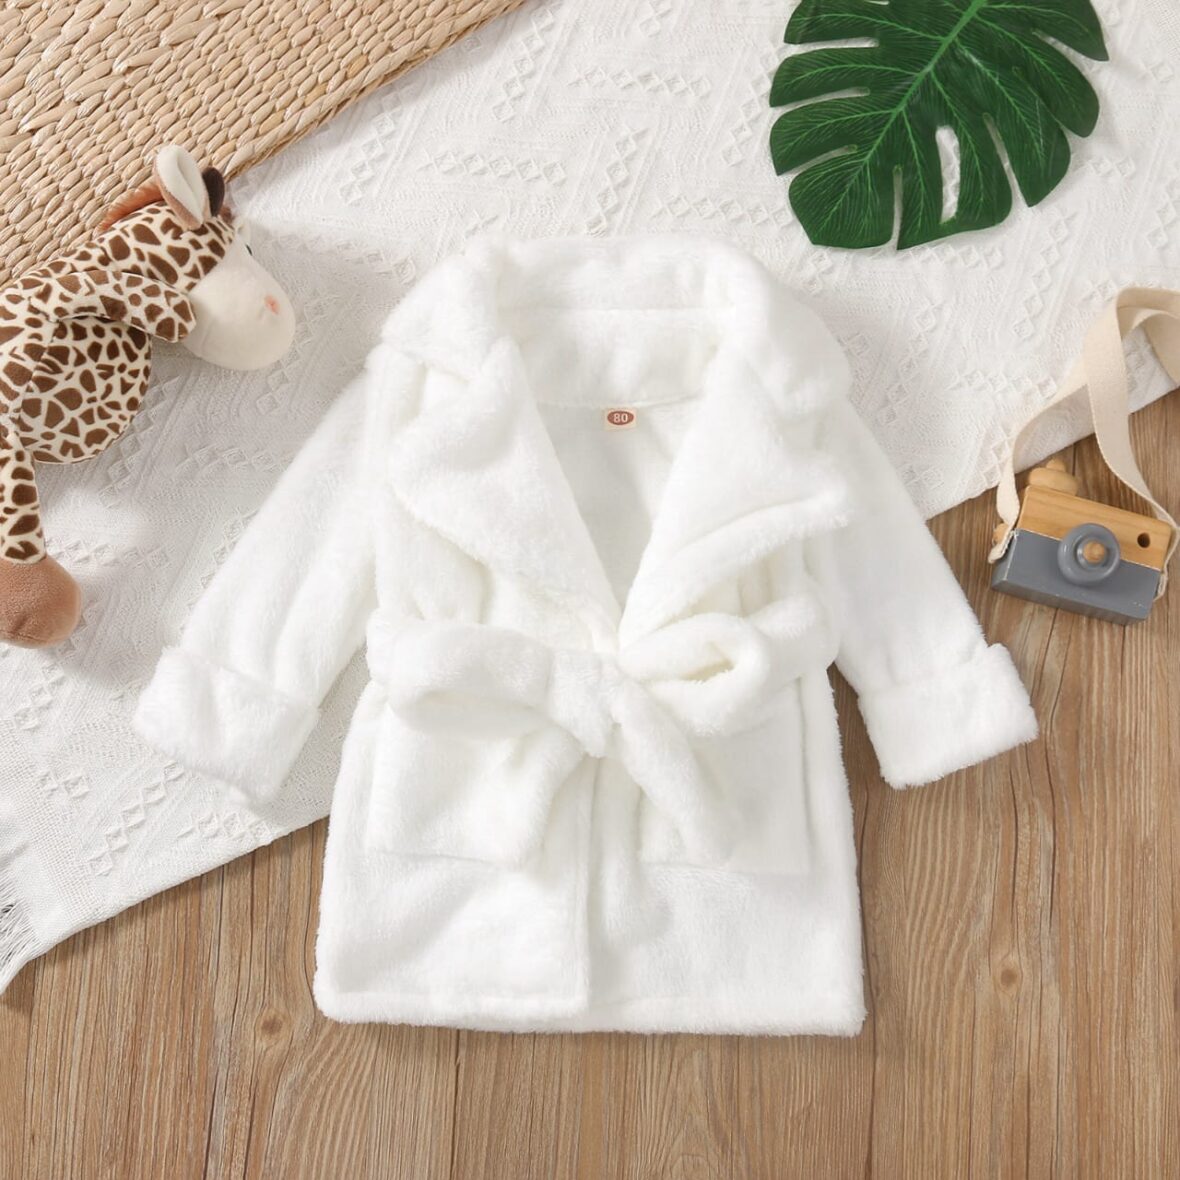 Unisex White Classic Robe Available On Mid-Year Clearance Sales